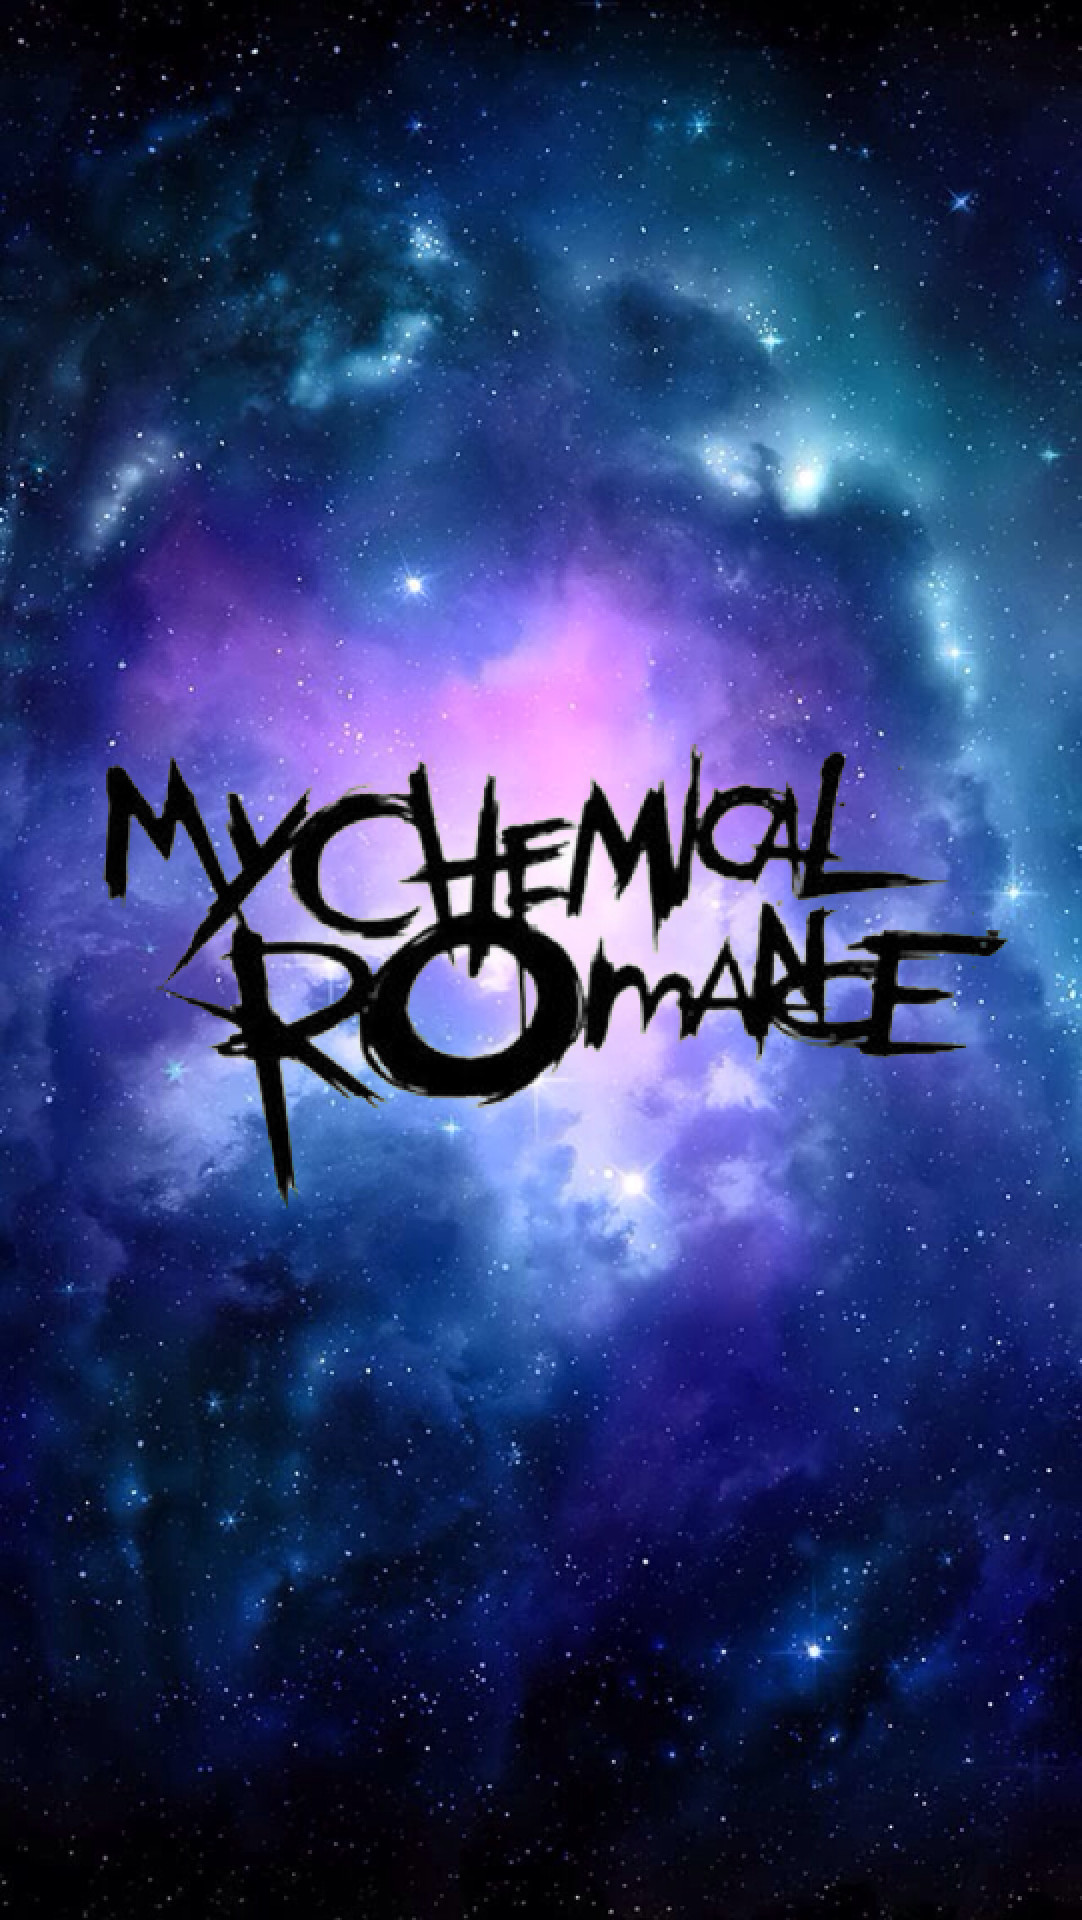 My Chemical Romance Wallpaper For Iphone 5 That I Made - My Chemical Romance  The Black Parade Png - 1082x1920 Wallpaper 